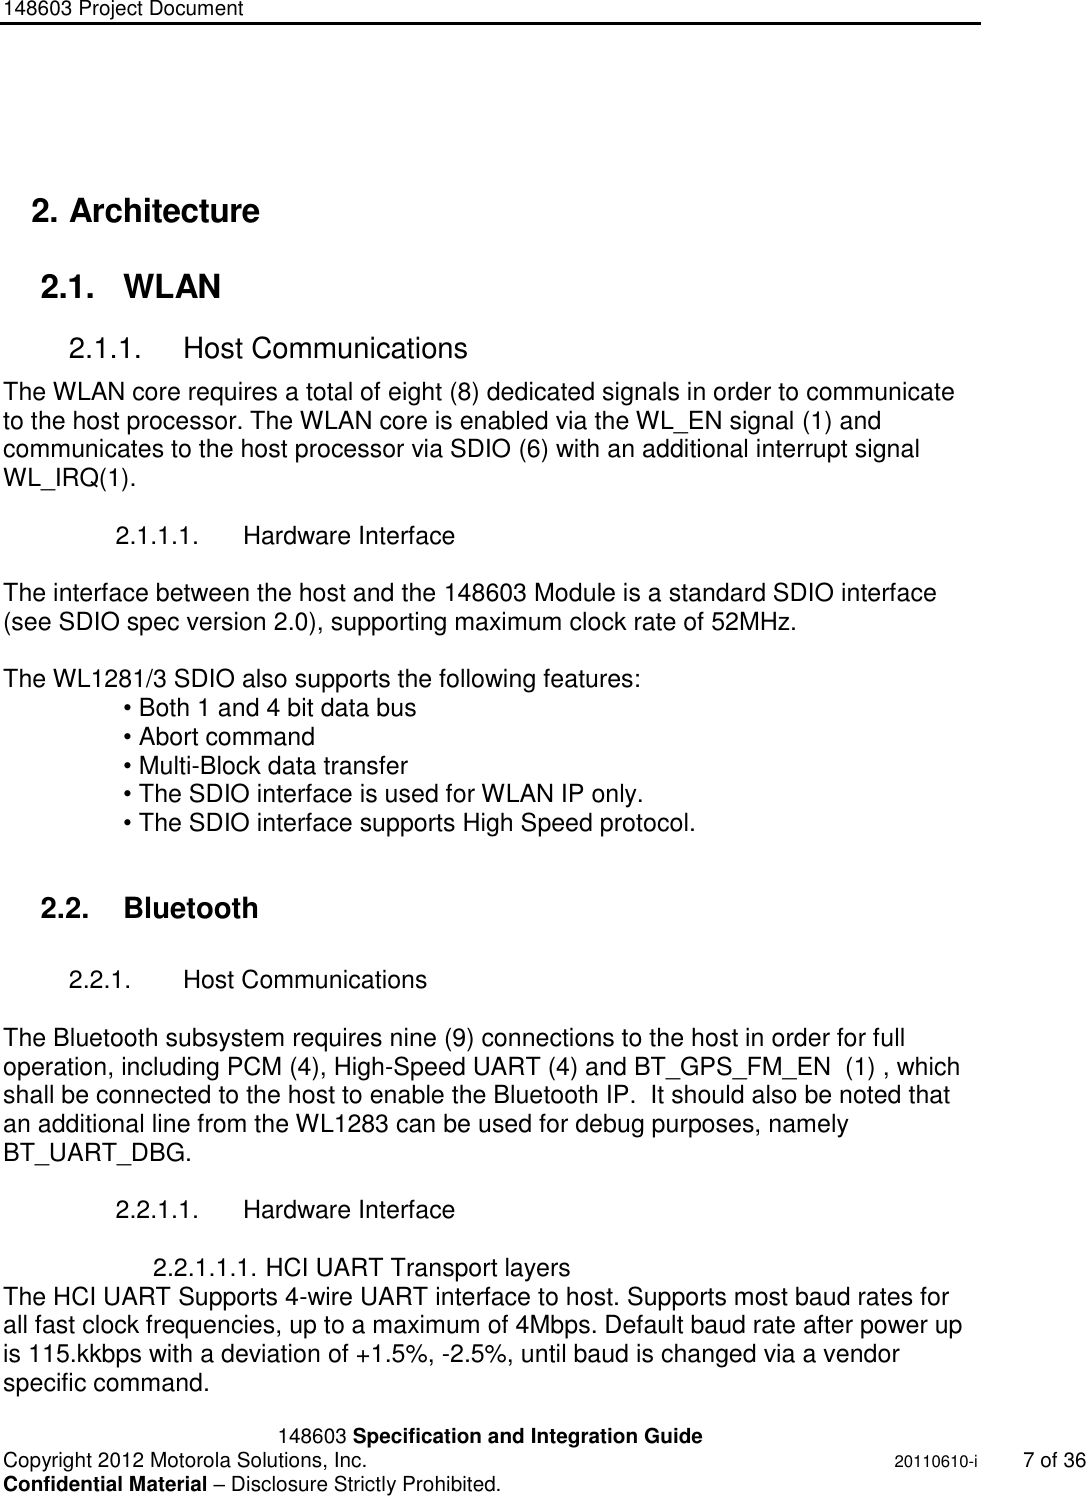 148603 Project Document       148603 Specification and Integration Guide  Copyright 2012 Motorola Solutions, Inc.    20110610-i  7 of 36 Confidential Material – Disclosure Strictly Prohibited. &quot;Ni ckel Leucochroic  Puffin&quot;   2. Architecture 2.1.  WLAN 2.1.1.  Host Communications The WLAN core requires a total of eight (8) dedicated signals in order to communicate to the host processor. The WLAN core is enabled via the WL_EN signal (1) and communicates to the host processor via SDIO (6) with an additional interrupt signal WL_IRQ(1).  2.1.1.1.  Hardware Interface  The interface between the host and the 148603 Module is a standard SDIO interface (see SDIO spec version 2.0), supporting maximum clock rate of 52MHz.  The WL1281/3 SDIO also supports the following features: • Both 1 and 4 bit data bus • Abort command • Multi-Block data transfer • The SDIO interface is used for WLAN IP only. • The SDIO interface supports High Speed protocol.  2.2.  Bluetooth  2.2.1.  Host Communications  The Bluetooth subsystem requires nine (9) connections to the host in order for full operation, including PCM (4), High-Speed UART (4) and BT_GPS_FM_EN  (1) , which shall be connected to the host to enable the Bluetooth IP.  It should also be noted that an additional line from the WL1283 can be used for debug purposes, namely BT_UART_DBG.  2.2.1.1.  Hardware Interface  2.2.1.1.1. HCI UART Transport layers  The HCI UART Supports 4-wire UART interface to host. Supports most baud rates for all fast clock frequencies, up to a maximum of 4Mbps. Default baud rate after power up is 115.kkbps with a deviation of +1.5%, -2.5%, until baud is changed via a vendor specific command. 